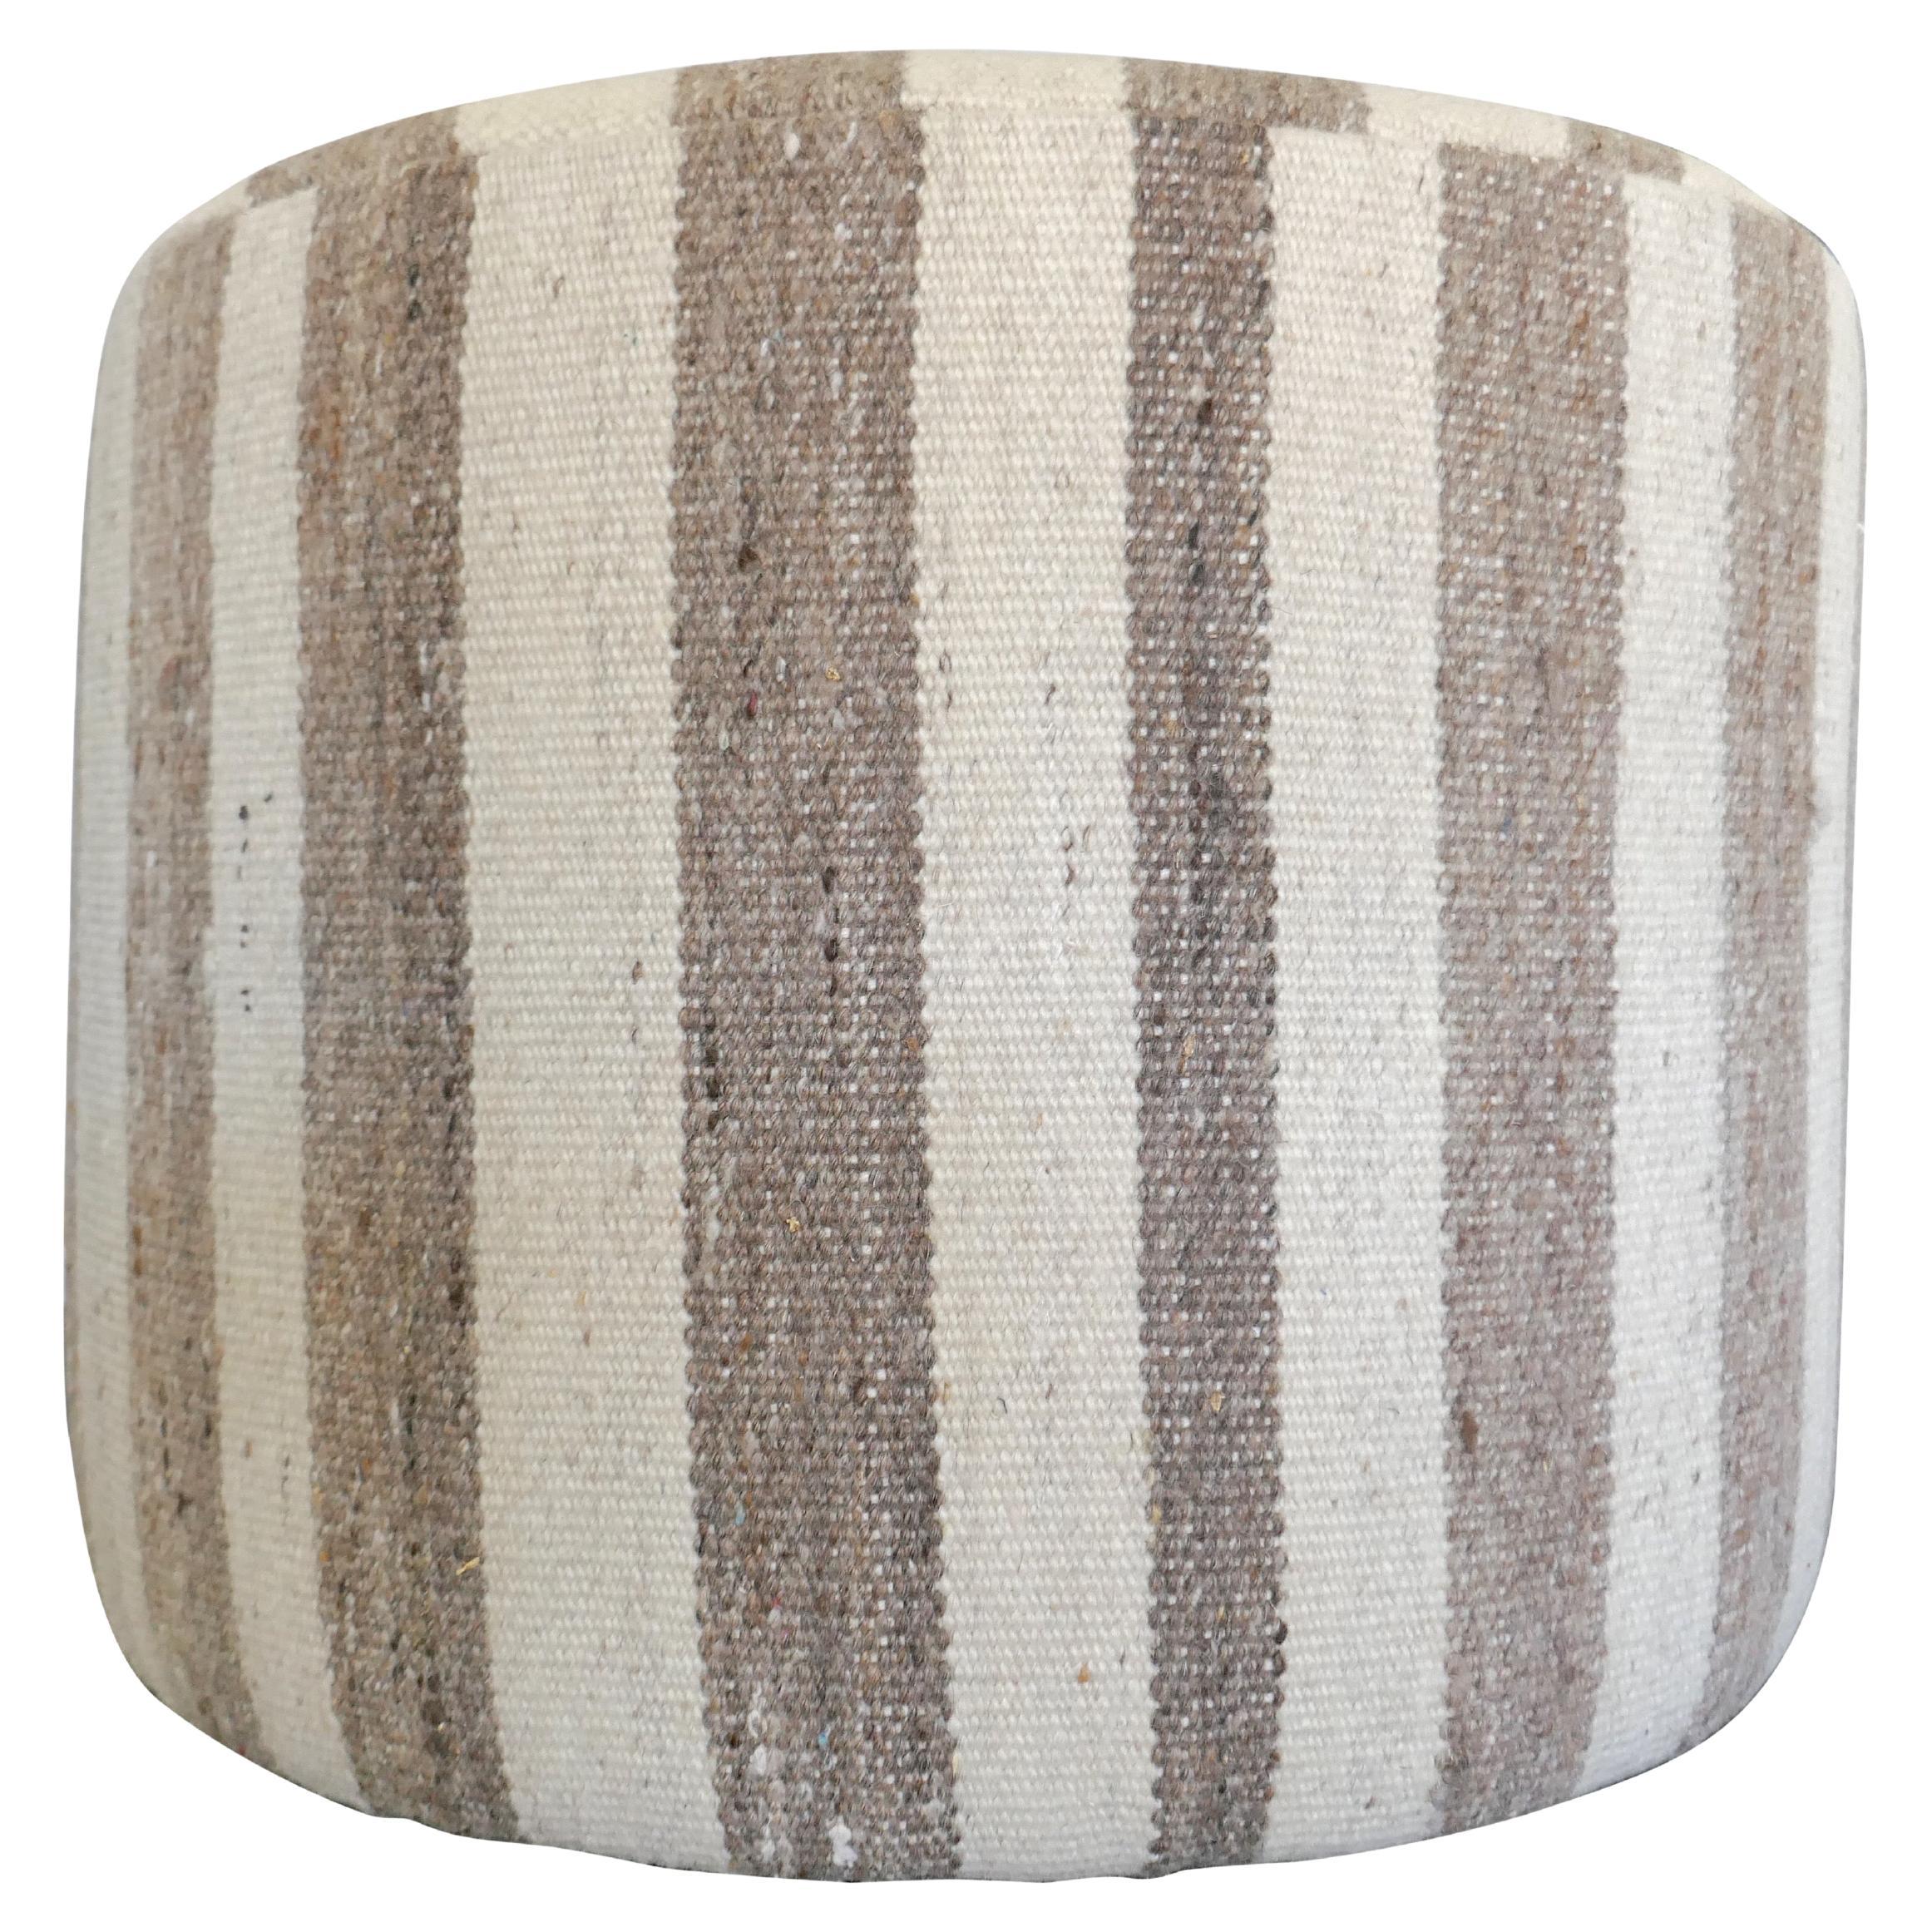 One-of-a-Kind!
FI custom cylinder style accent ottoman. Perfectly upholstered in fabulous authentic vintage hand-woven heavy textural Berber Kilim pure wool in beautiful variegated natural muted and earthy tone's. Featuring the original offset